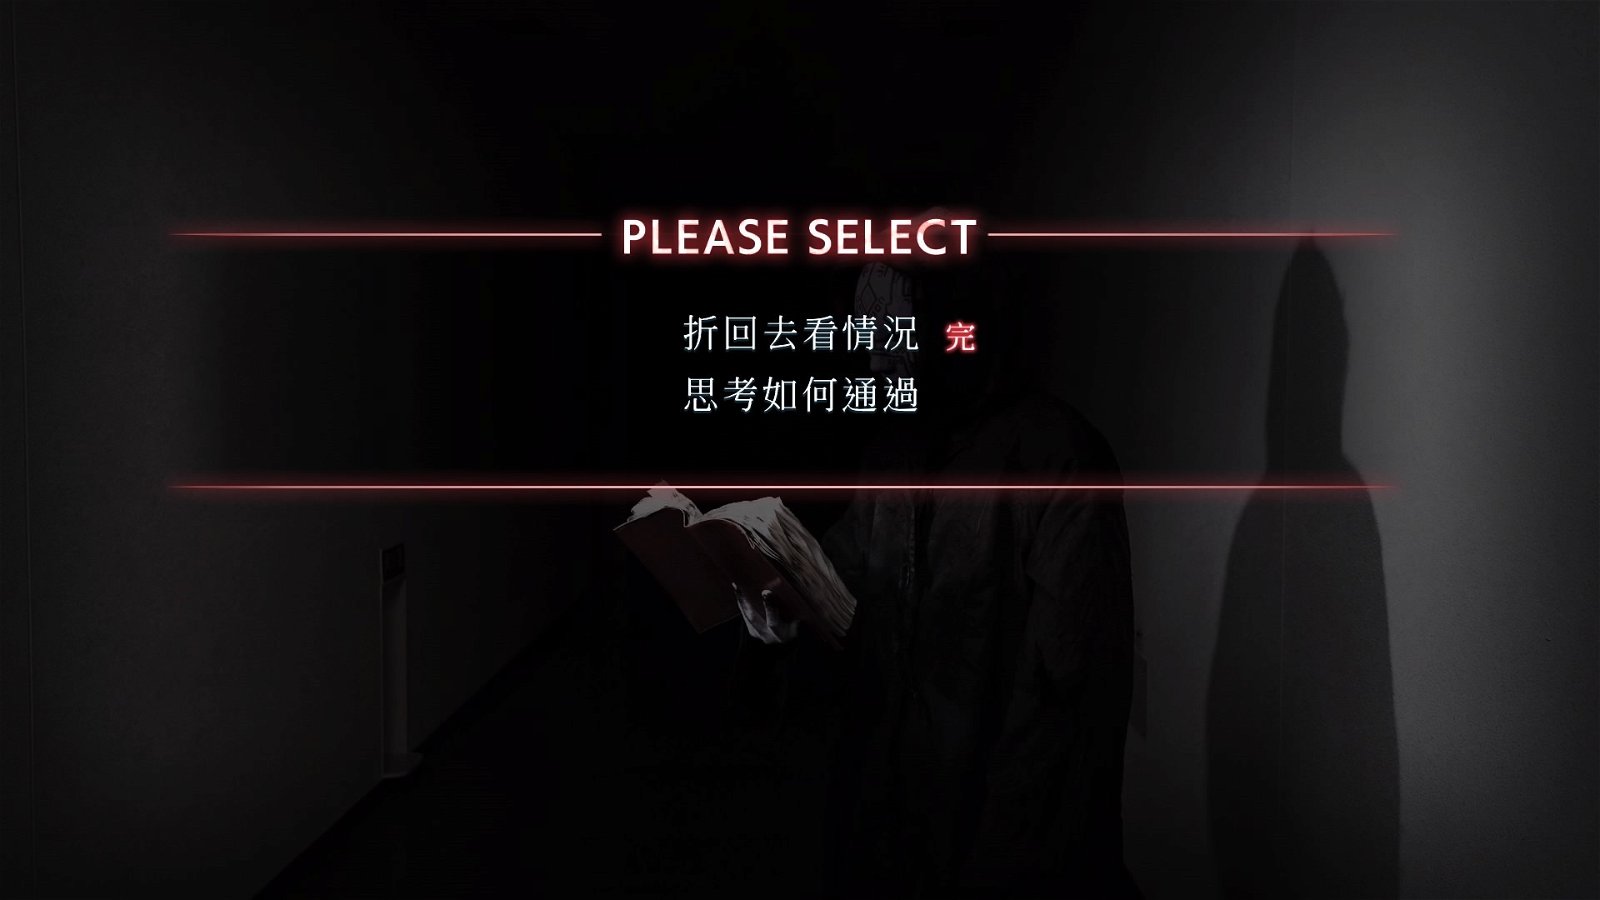 Closed Nightmare offers a wide variety of options for the movie sequences. These include options like to pause, restart, stop, and switch subtitles on or off. Furthermore, there will also be a timeline for the events. With this, players can quickly go back to earlier parts of the game and try different paths. Also, players can easily tell which choices were done already as the game will note it out for them. A character list is also featured in the game to refresh the memory of the players. And there are shortcut menus as well that is not often seen in other horror games.